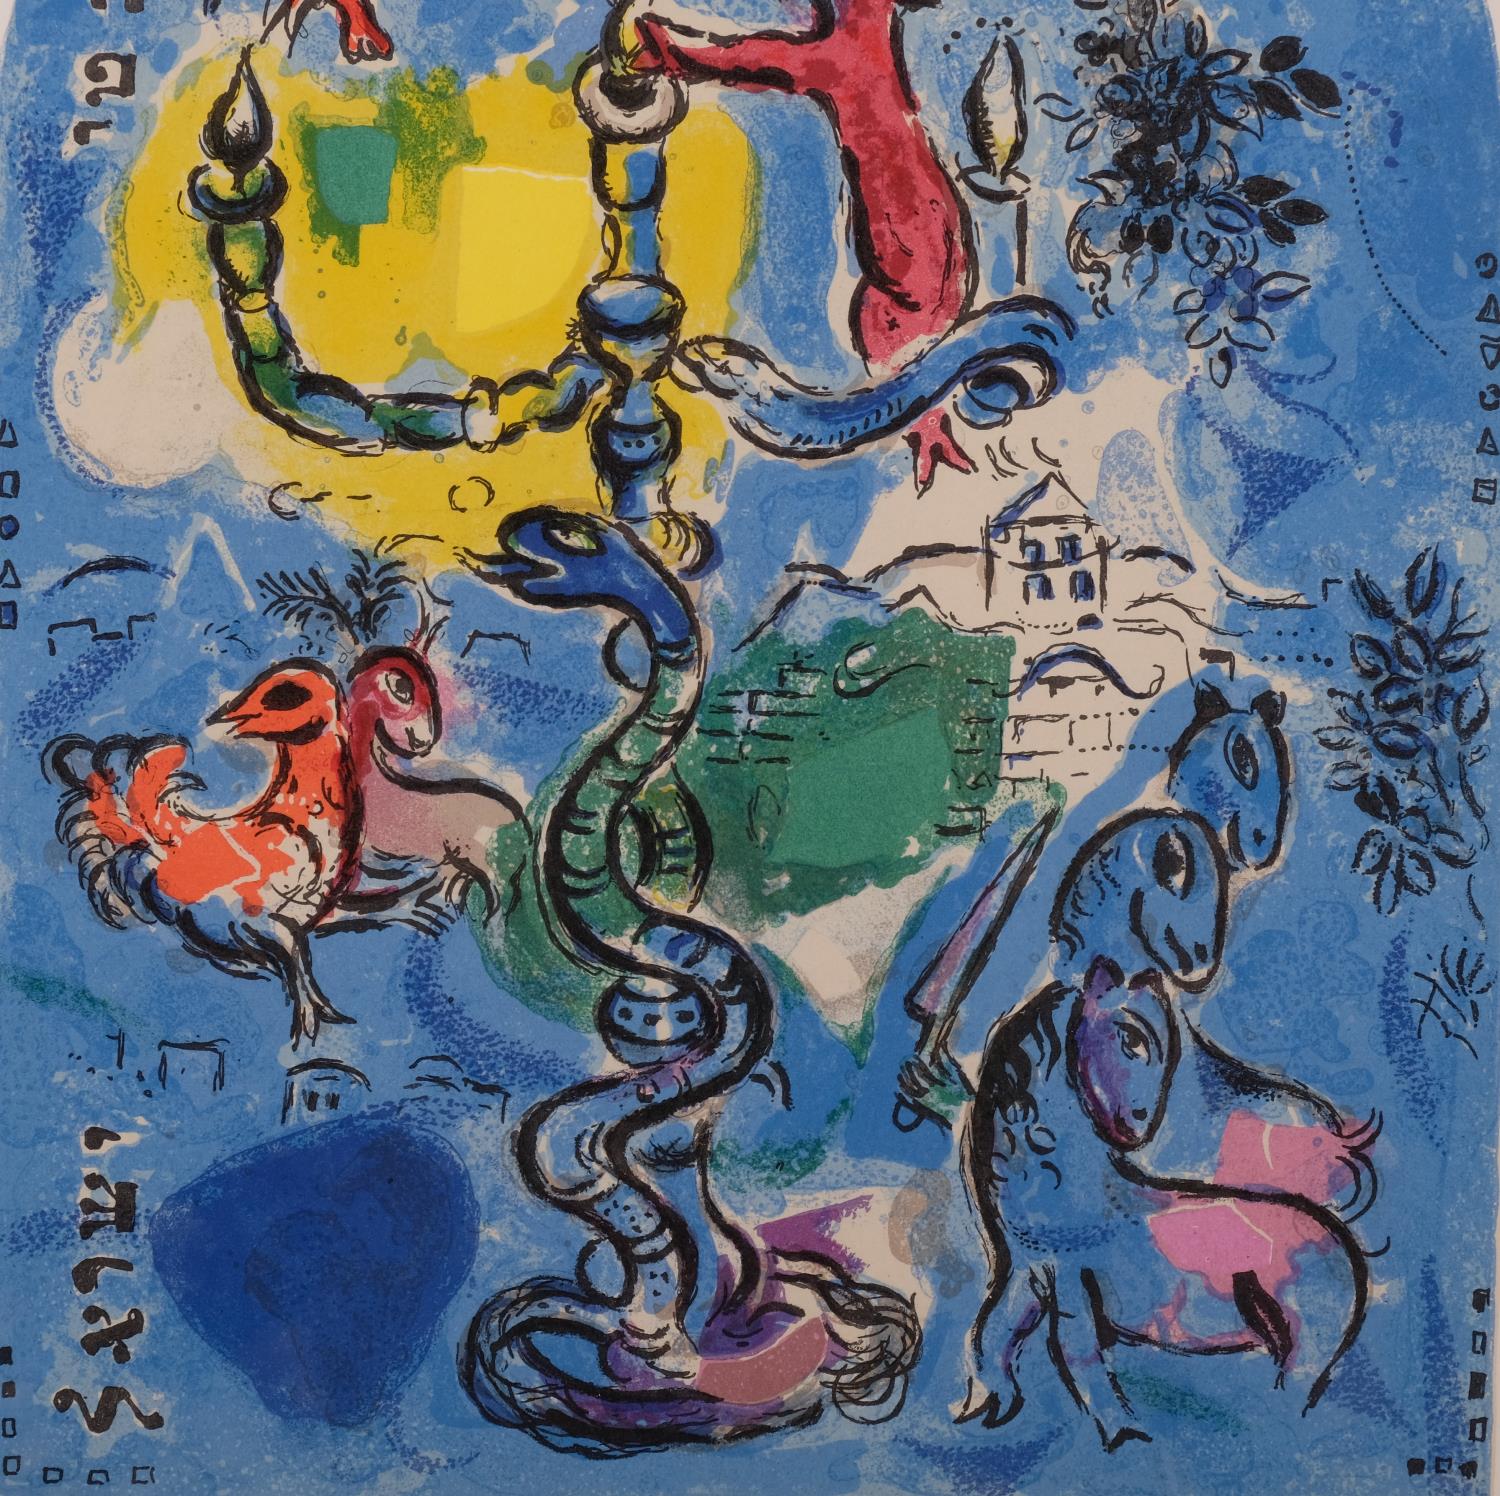 Marc Chagall/C Sorlier, window design, lithograph 1962, small version, image 29cm x 21cm, framed - Image 3 of 4